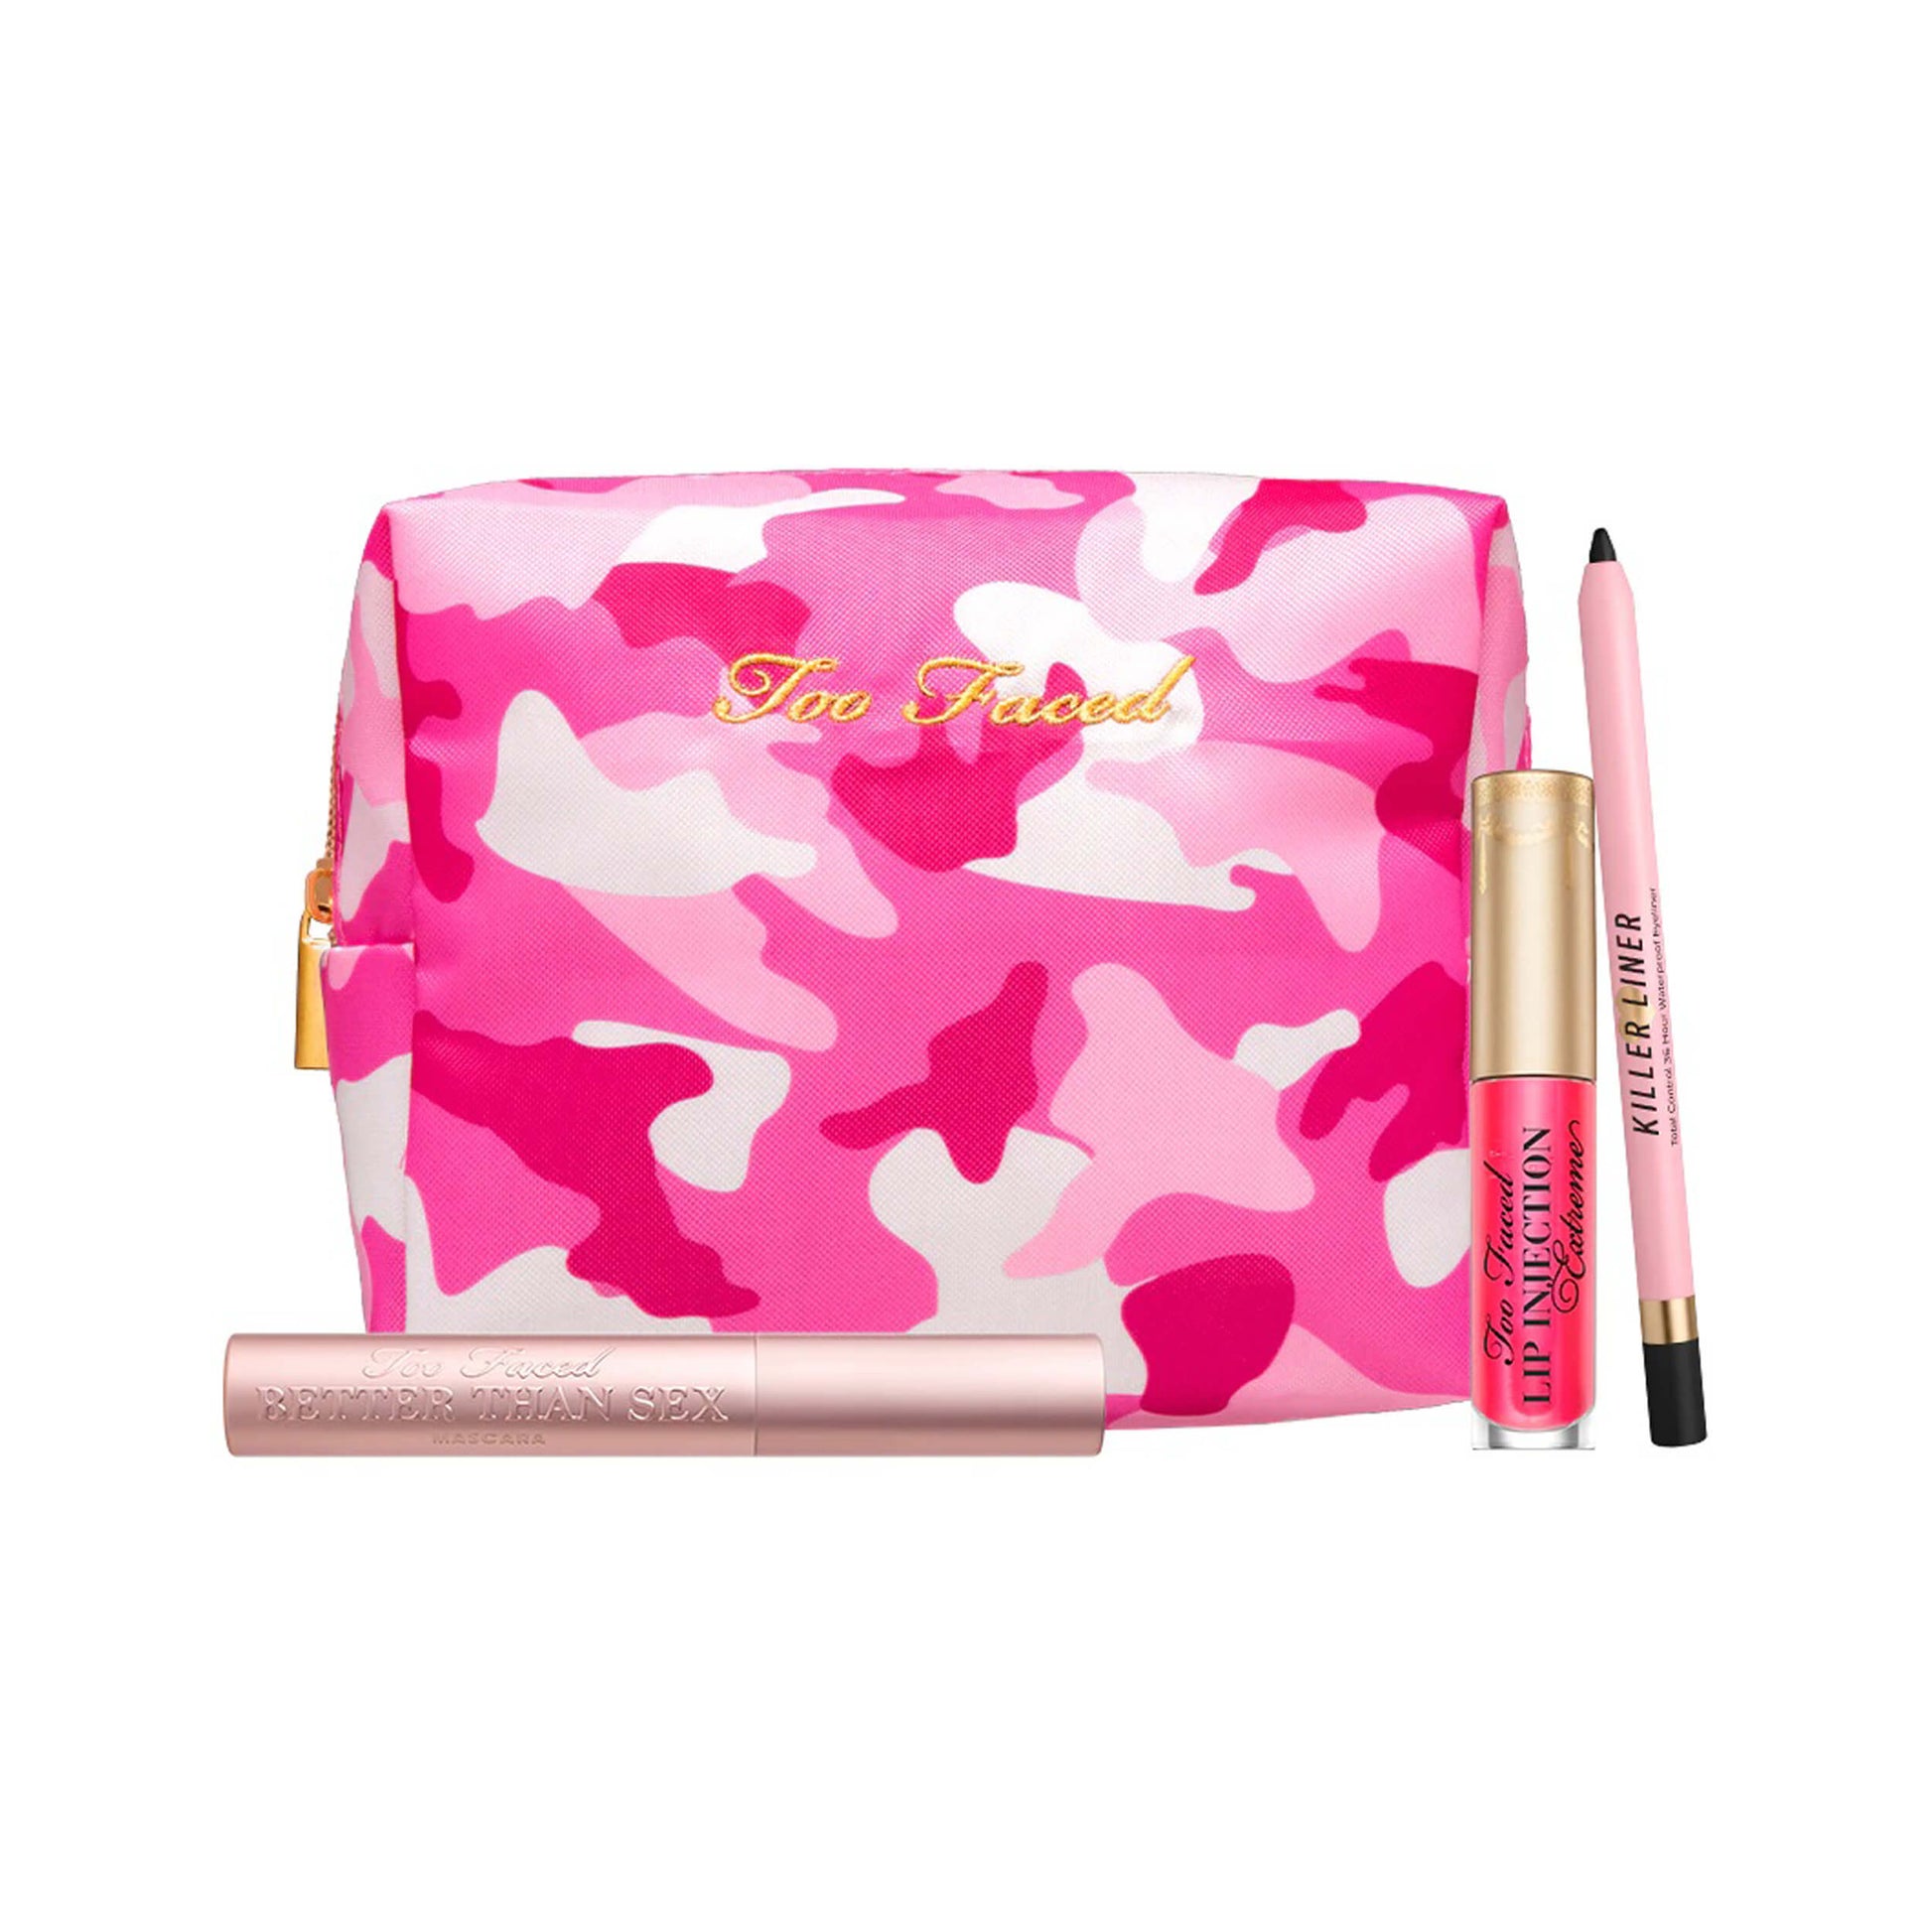 Too Faced Army of Love Makeup Essentials Set